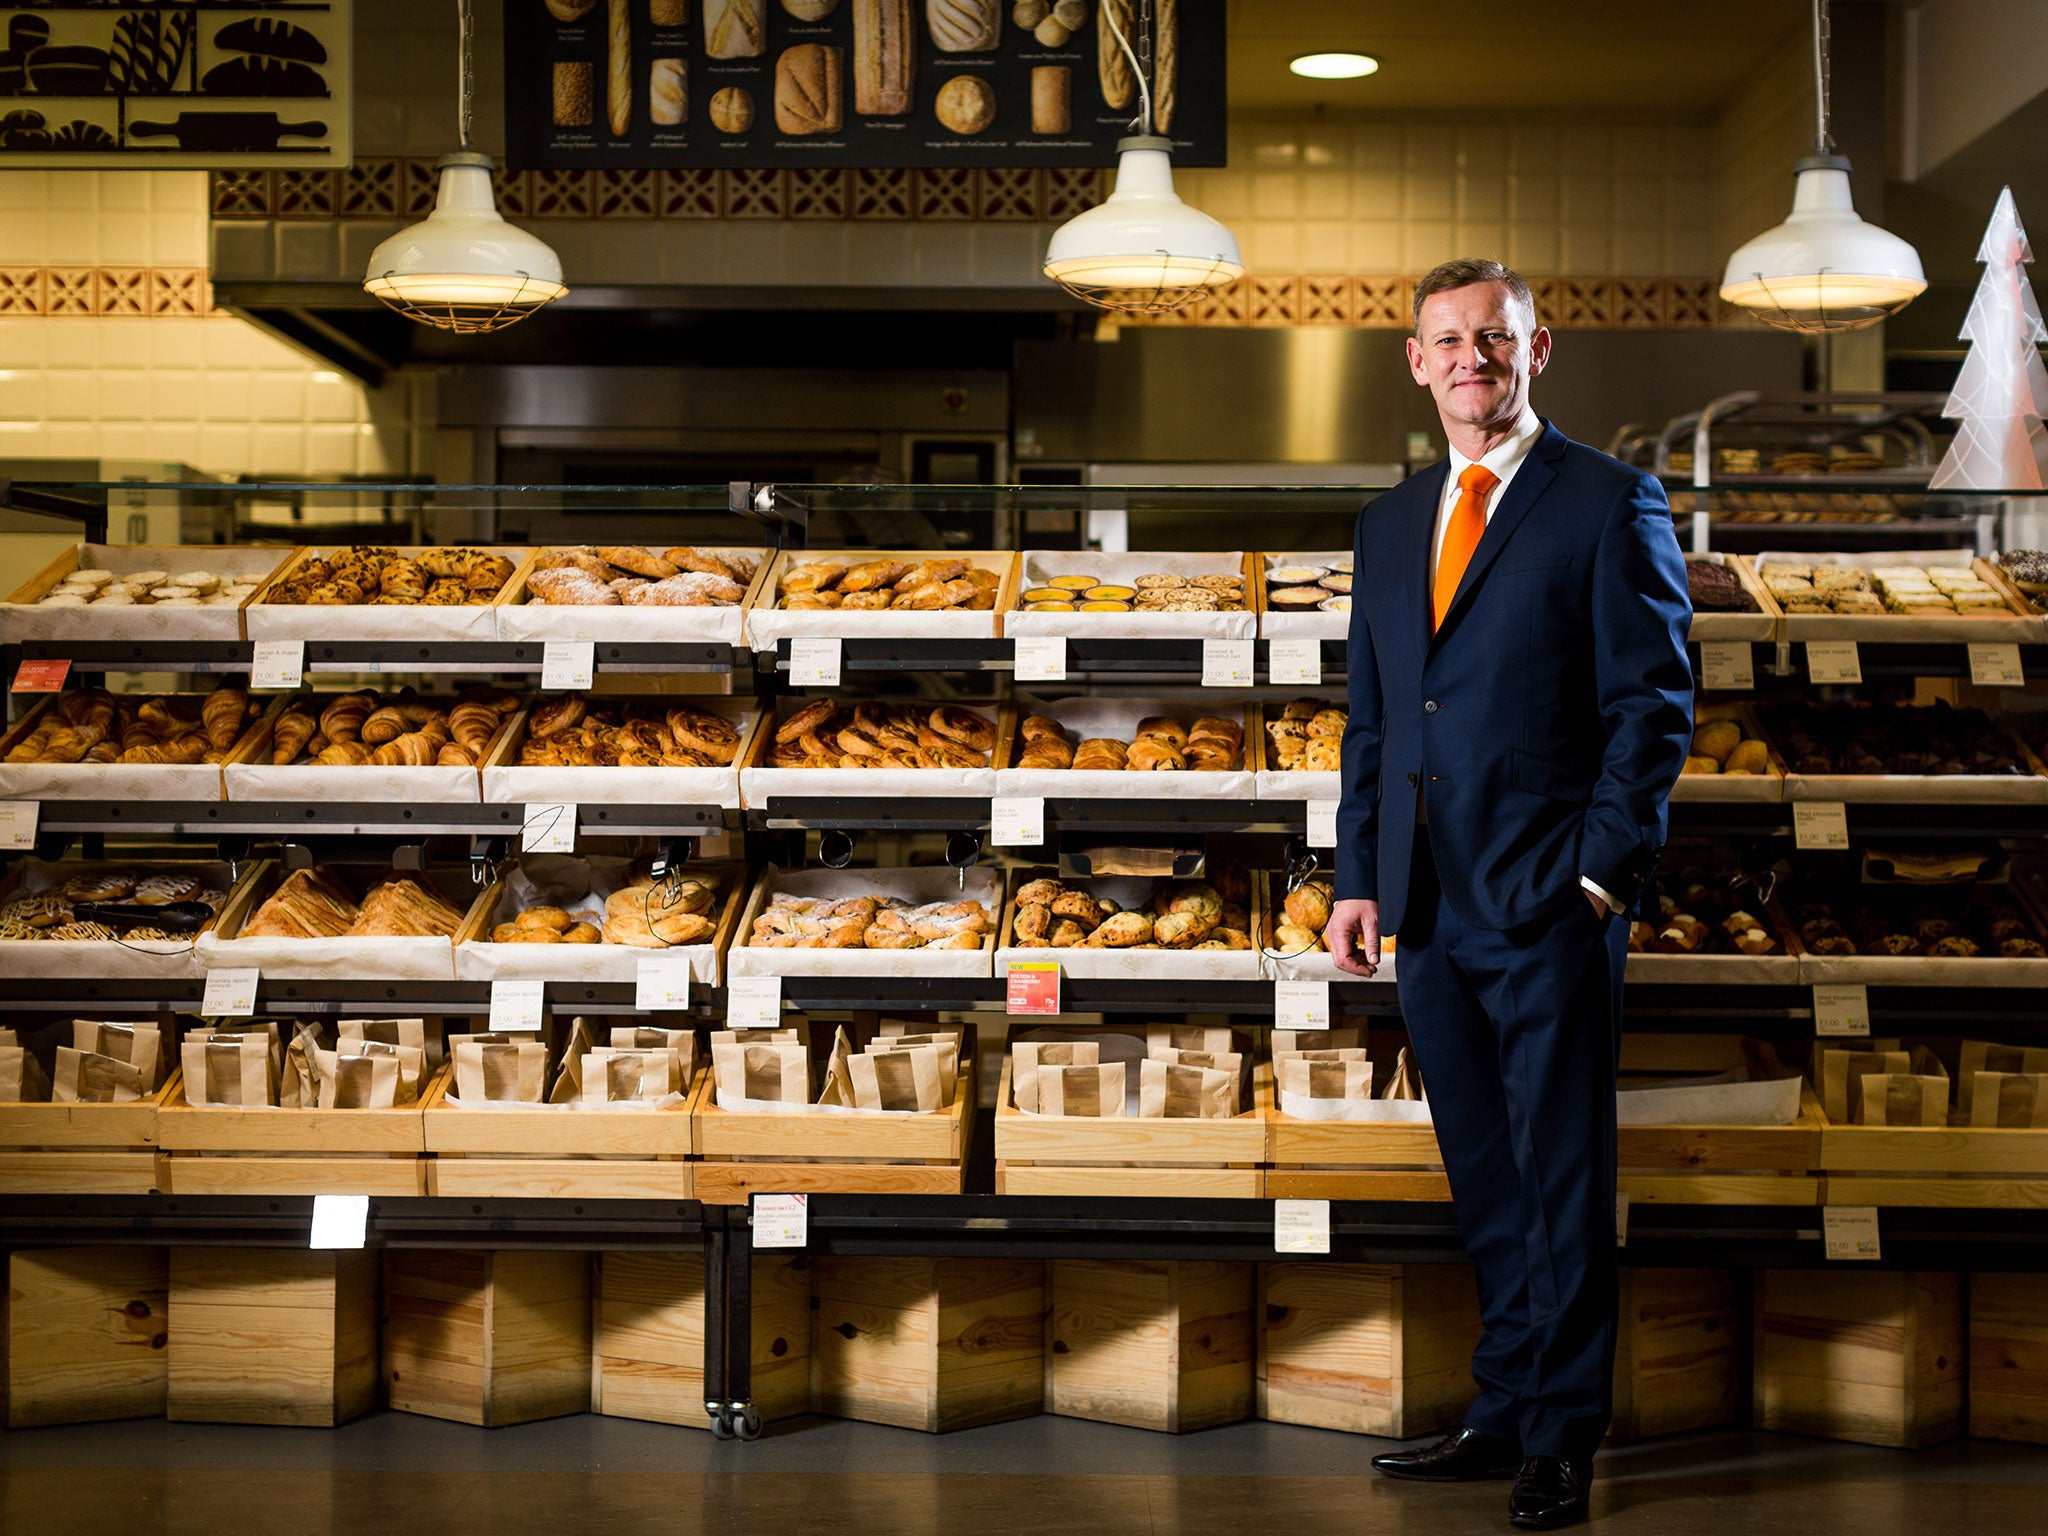 Steve Rowe has worked for the company for 26 years, and was the head of food